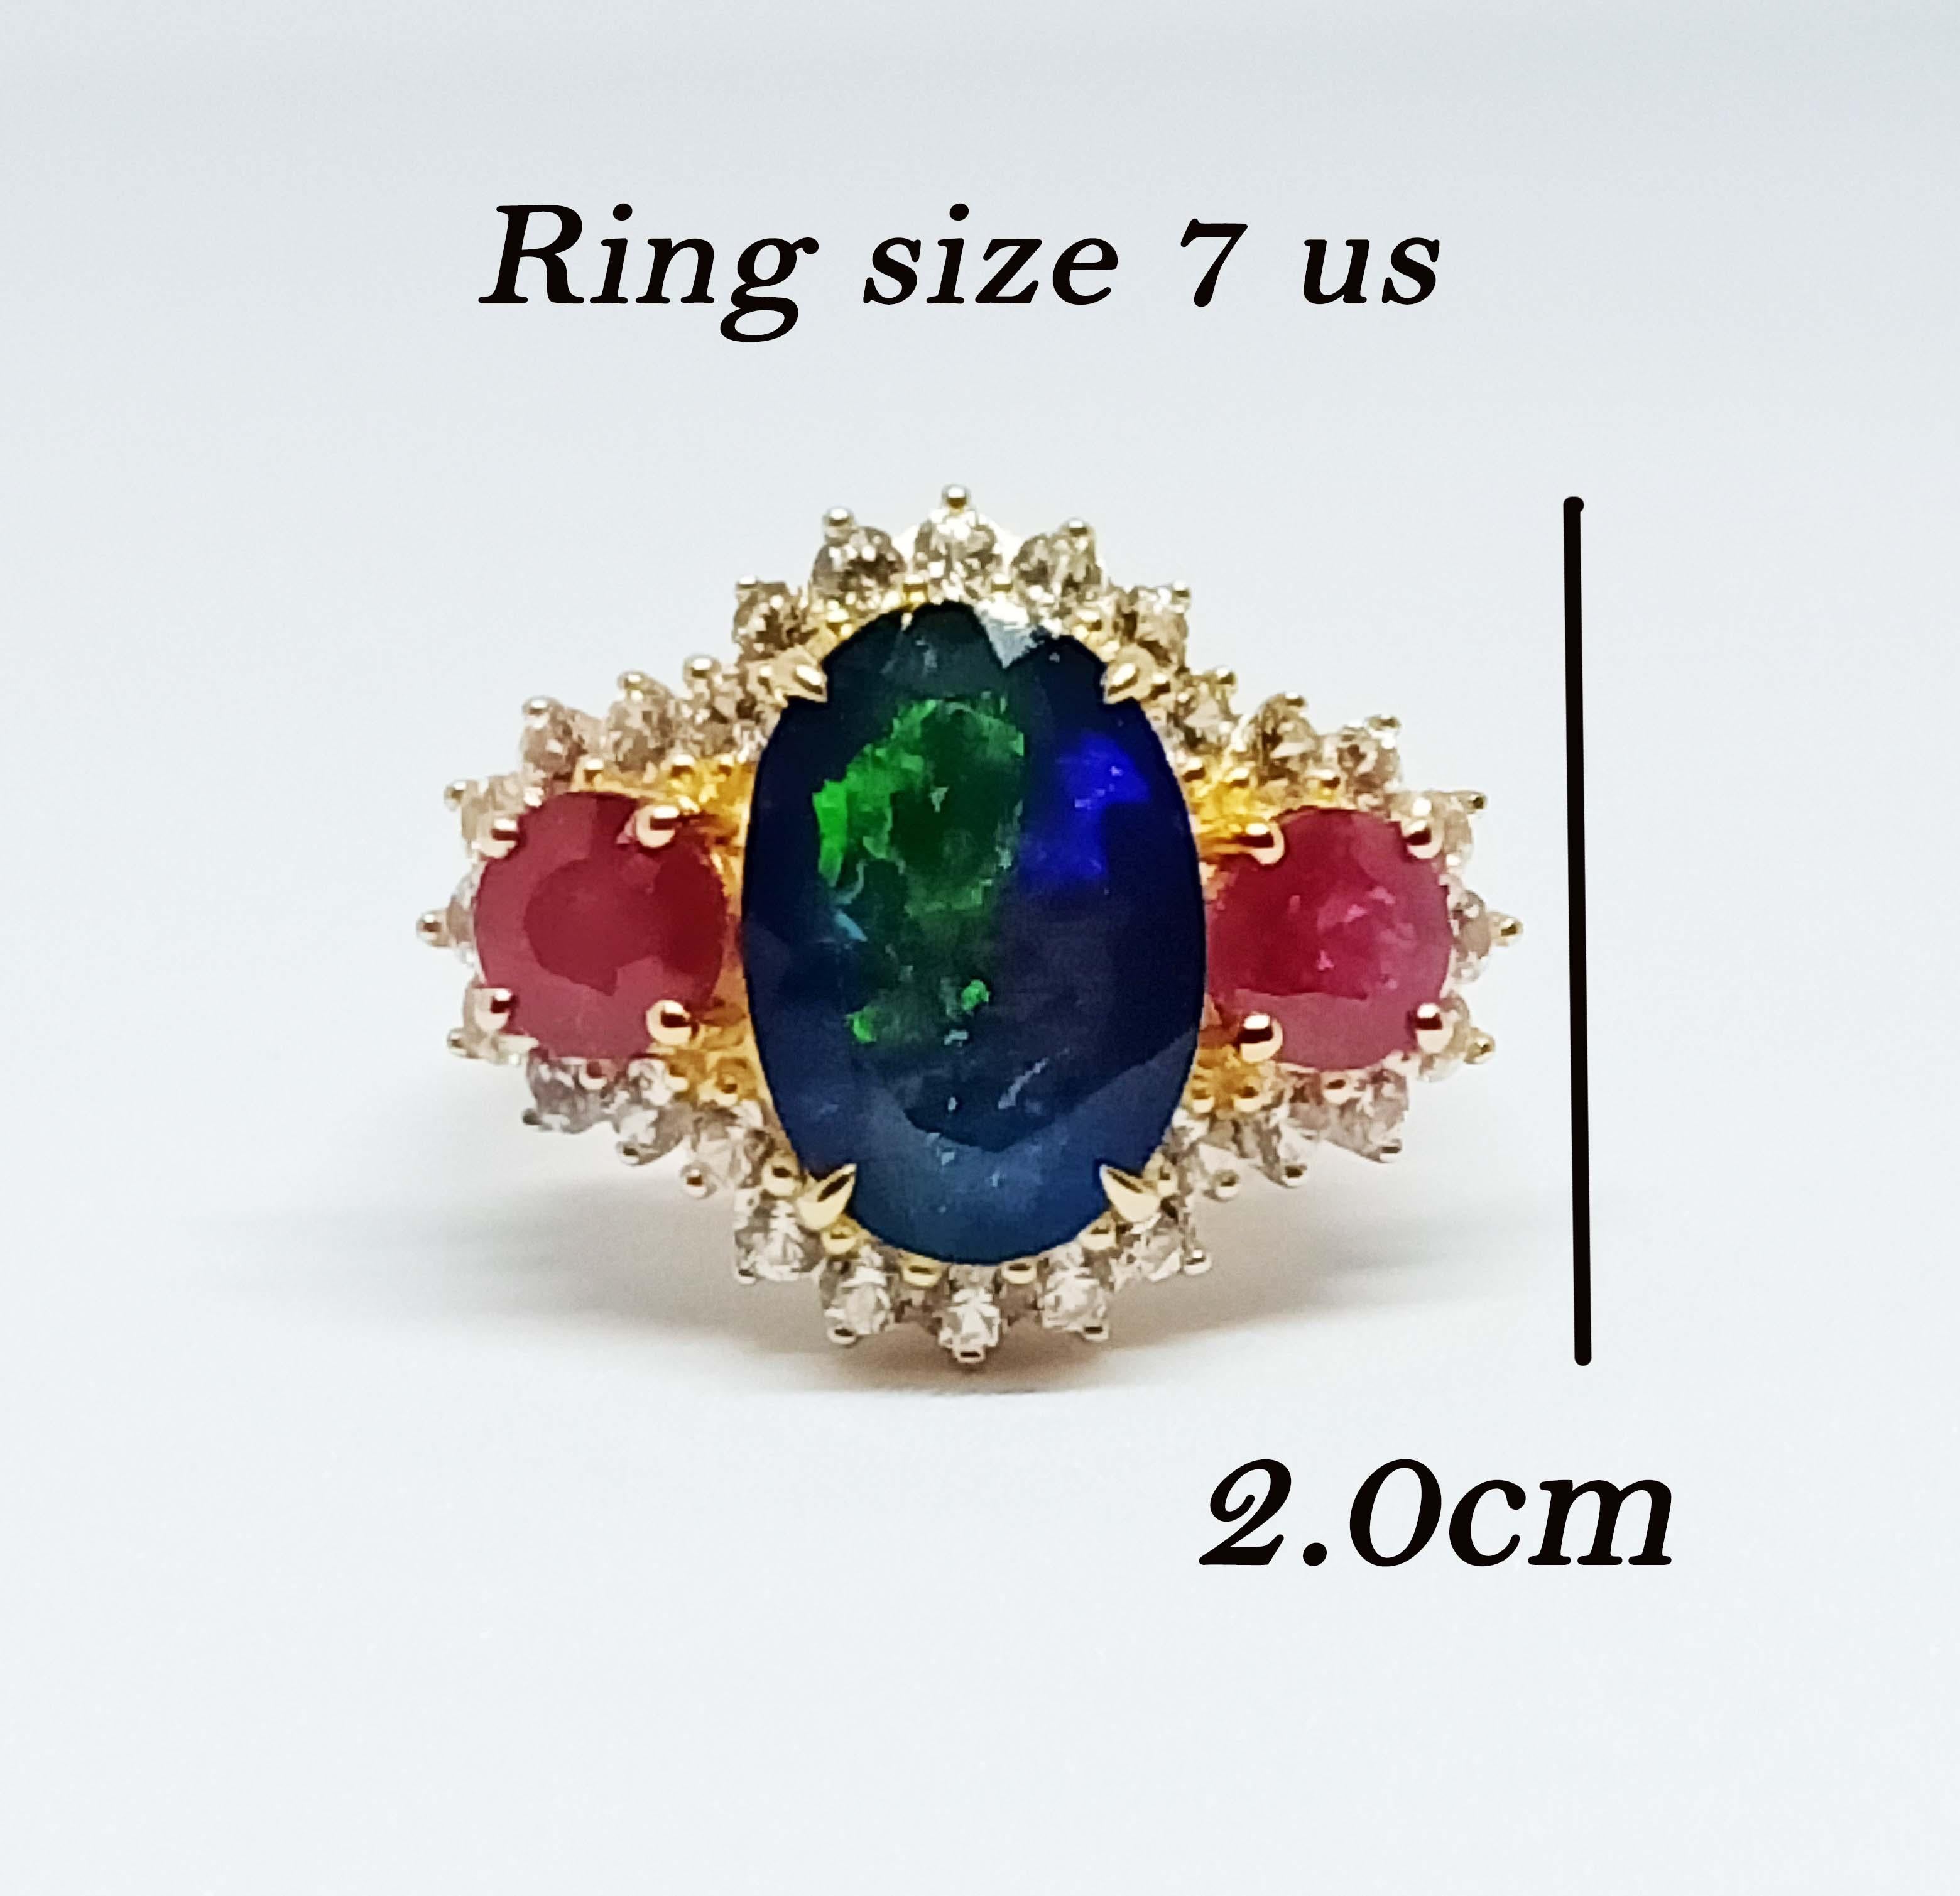 Black Opal   Oval  5.2x10.5mm.  7.09 cts.
Ruby             Round 6 mm.  2.52cts.  2 pcs. 
White Zircon Round 2.25 mm. 28 pcs.

Sterling Silver on 18K Gold Plated.
Ring : Size 7 us.


